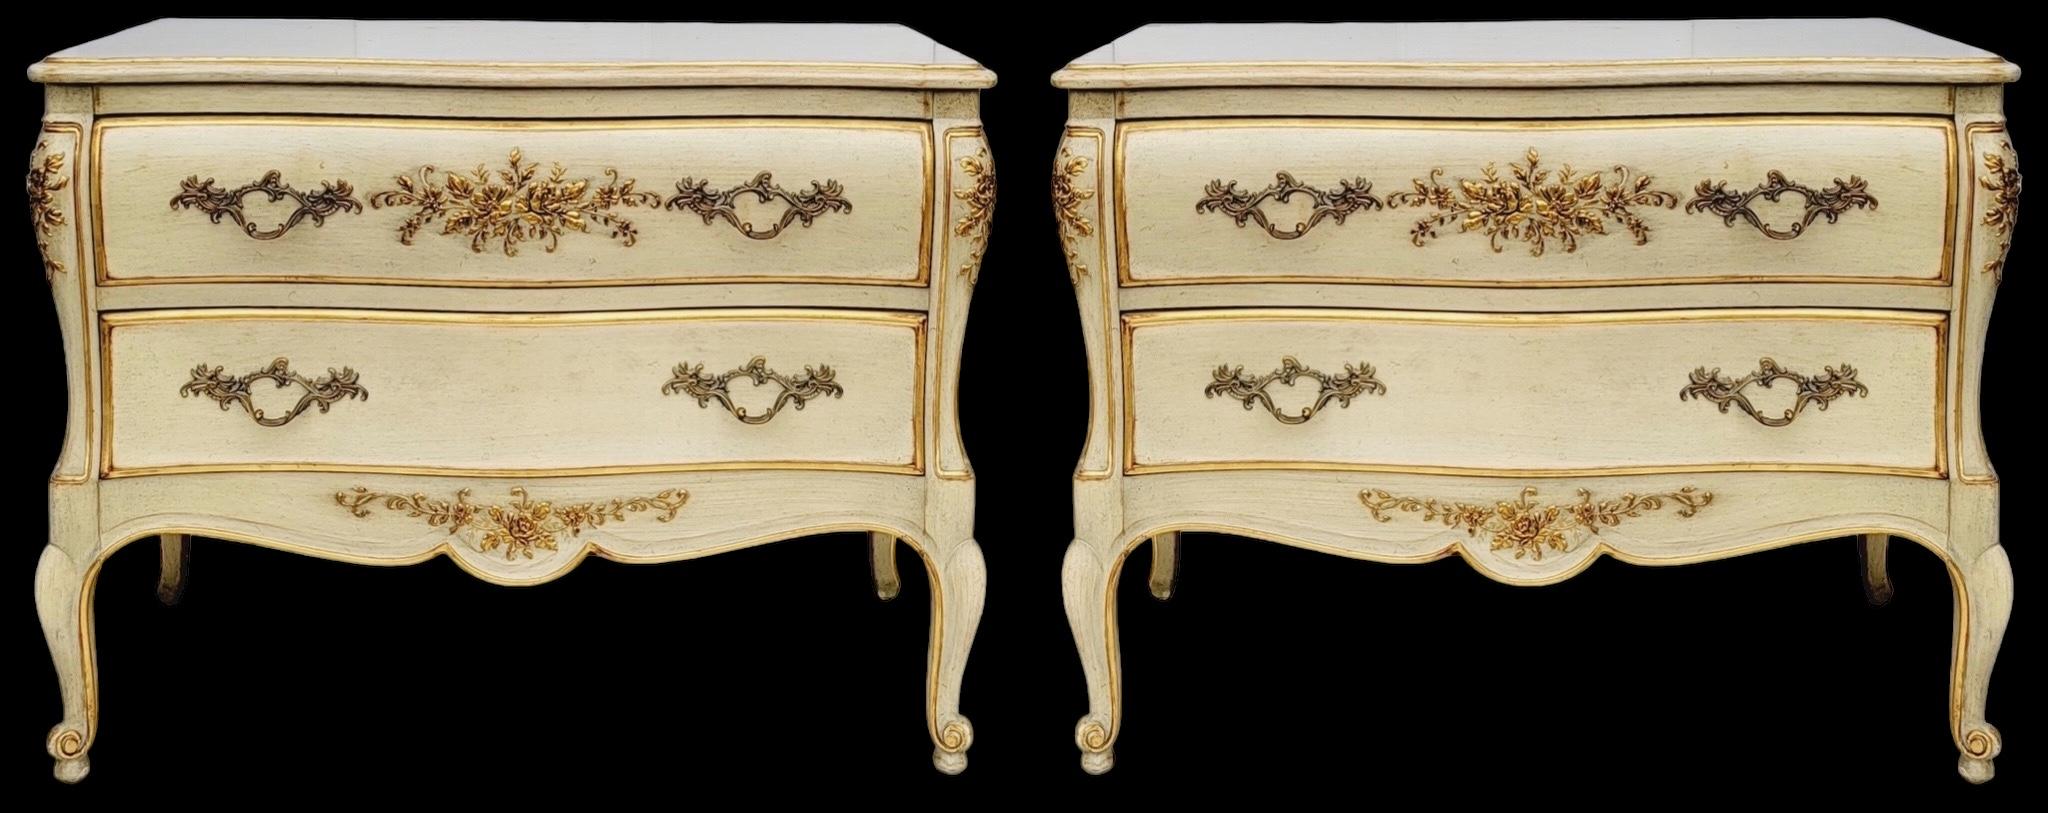 Wood 1970s French Louis  XV Style Painted And Gilded Chests / Commodes By Dixon For Sale